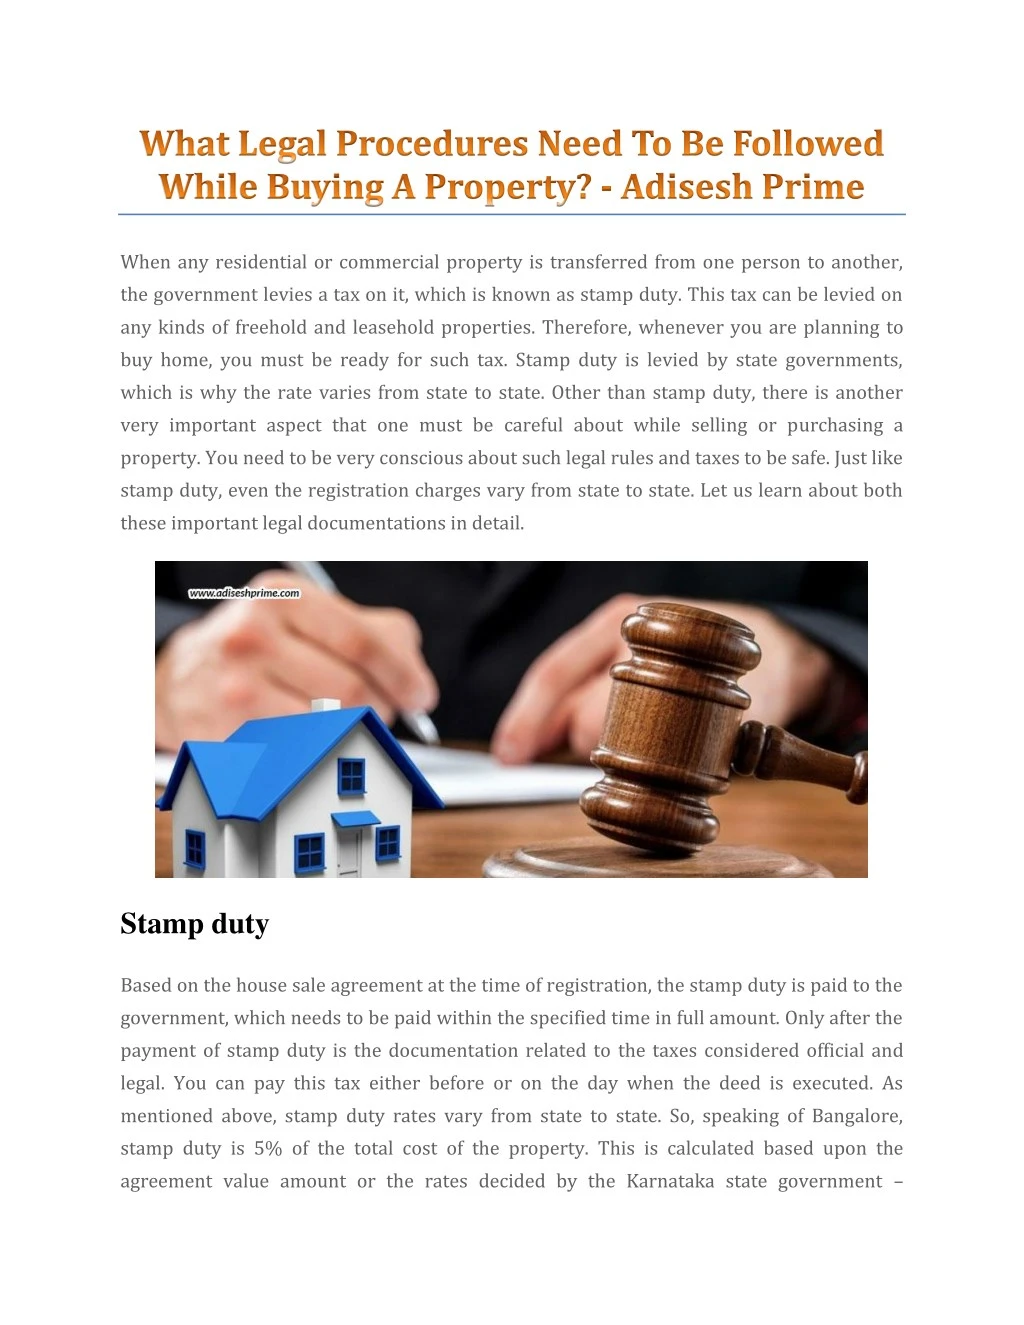 when any residential or commercial property